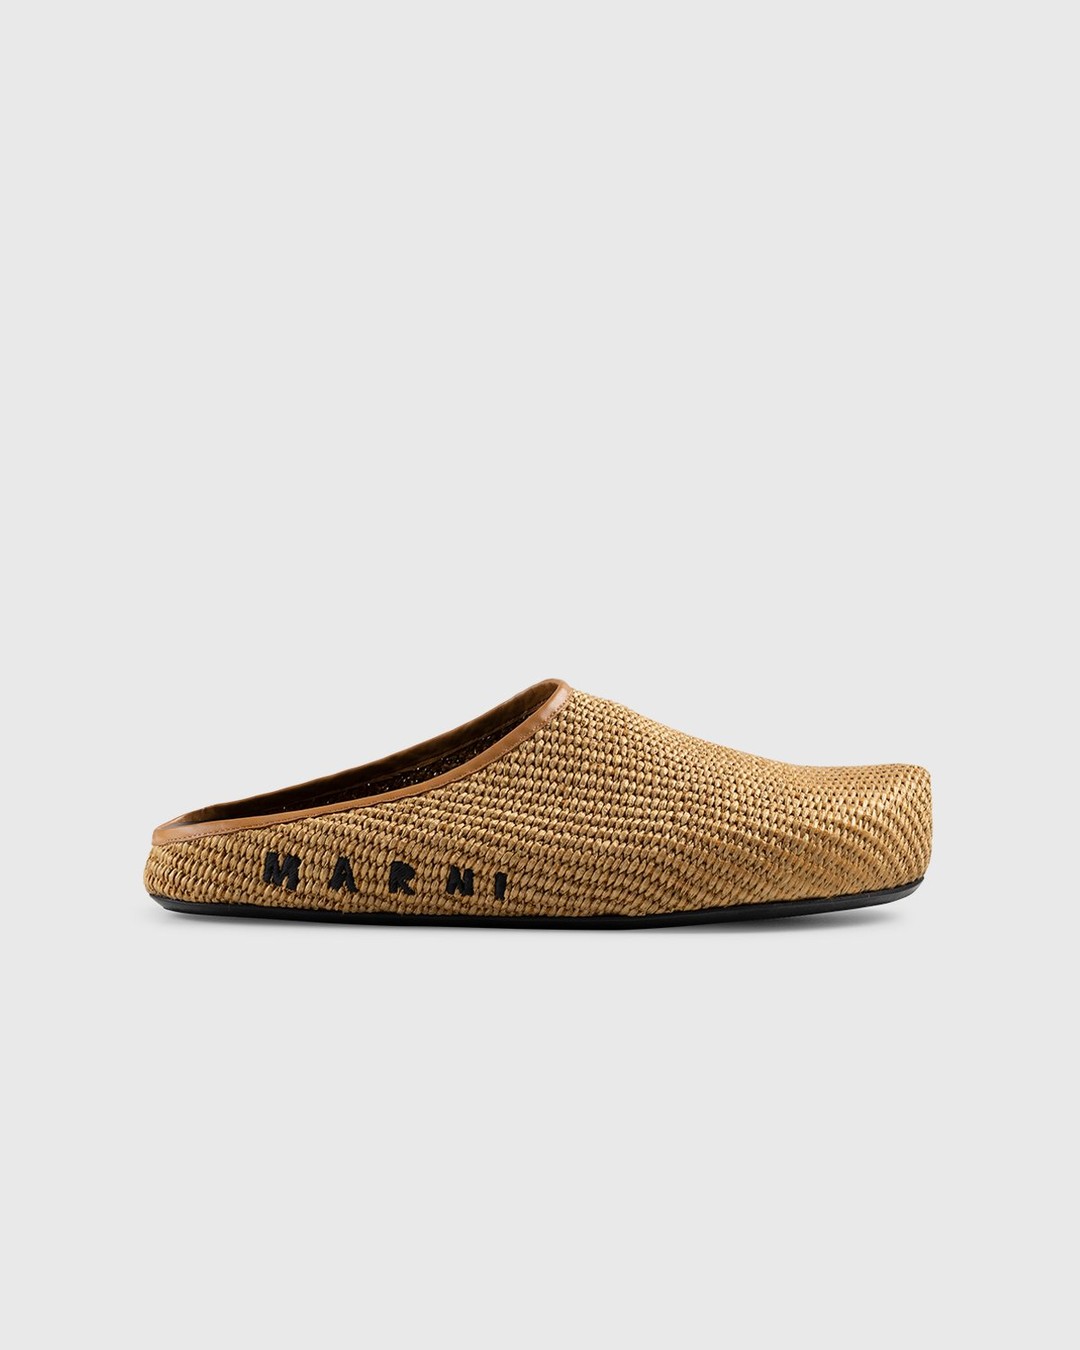 Marni – Woven Raffia and Leather Mules Brown/Black - Shoes - Brown - Image 1